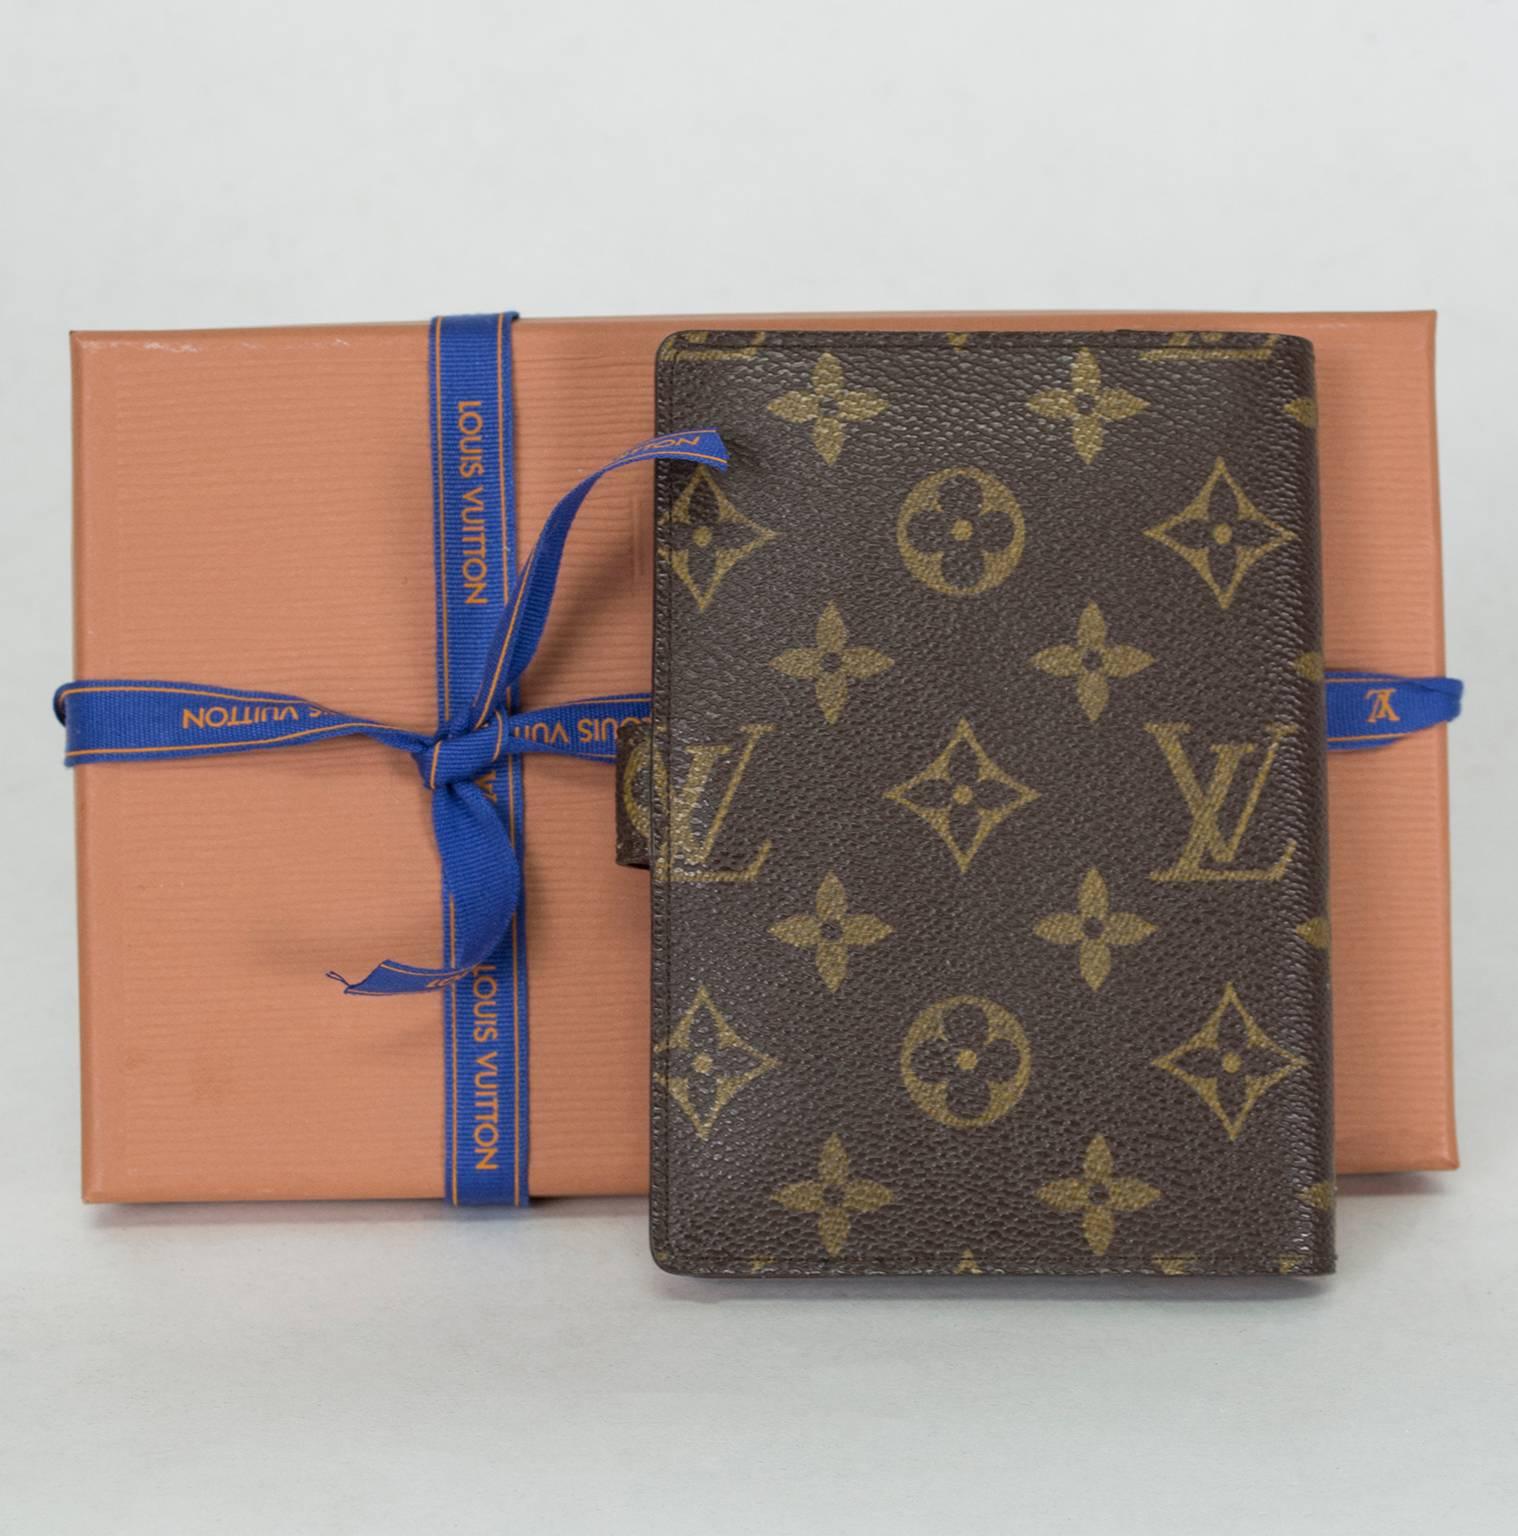 For those who enjoy putting pen to paper, there is no more stylish way to maintain your schedule than a Louis Vuitton planner. Small enough to fit in a purse, briefcase or even a coat pocket, this agenda provides the added comfort of a hard copy